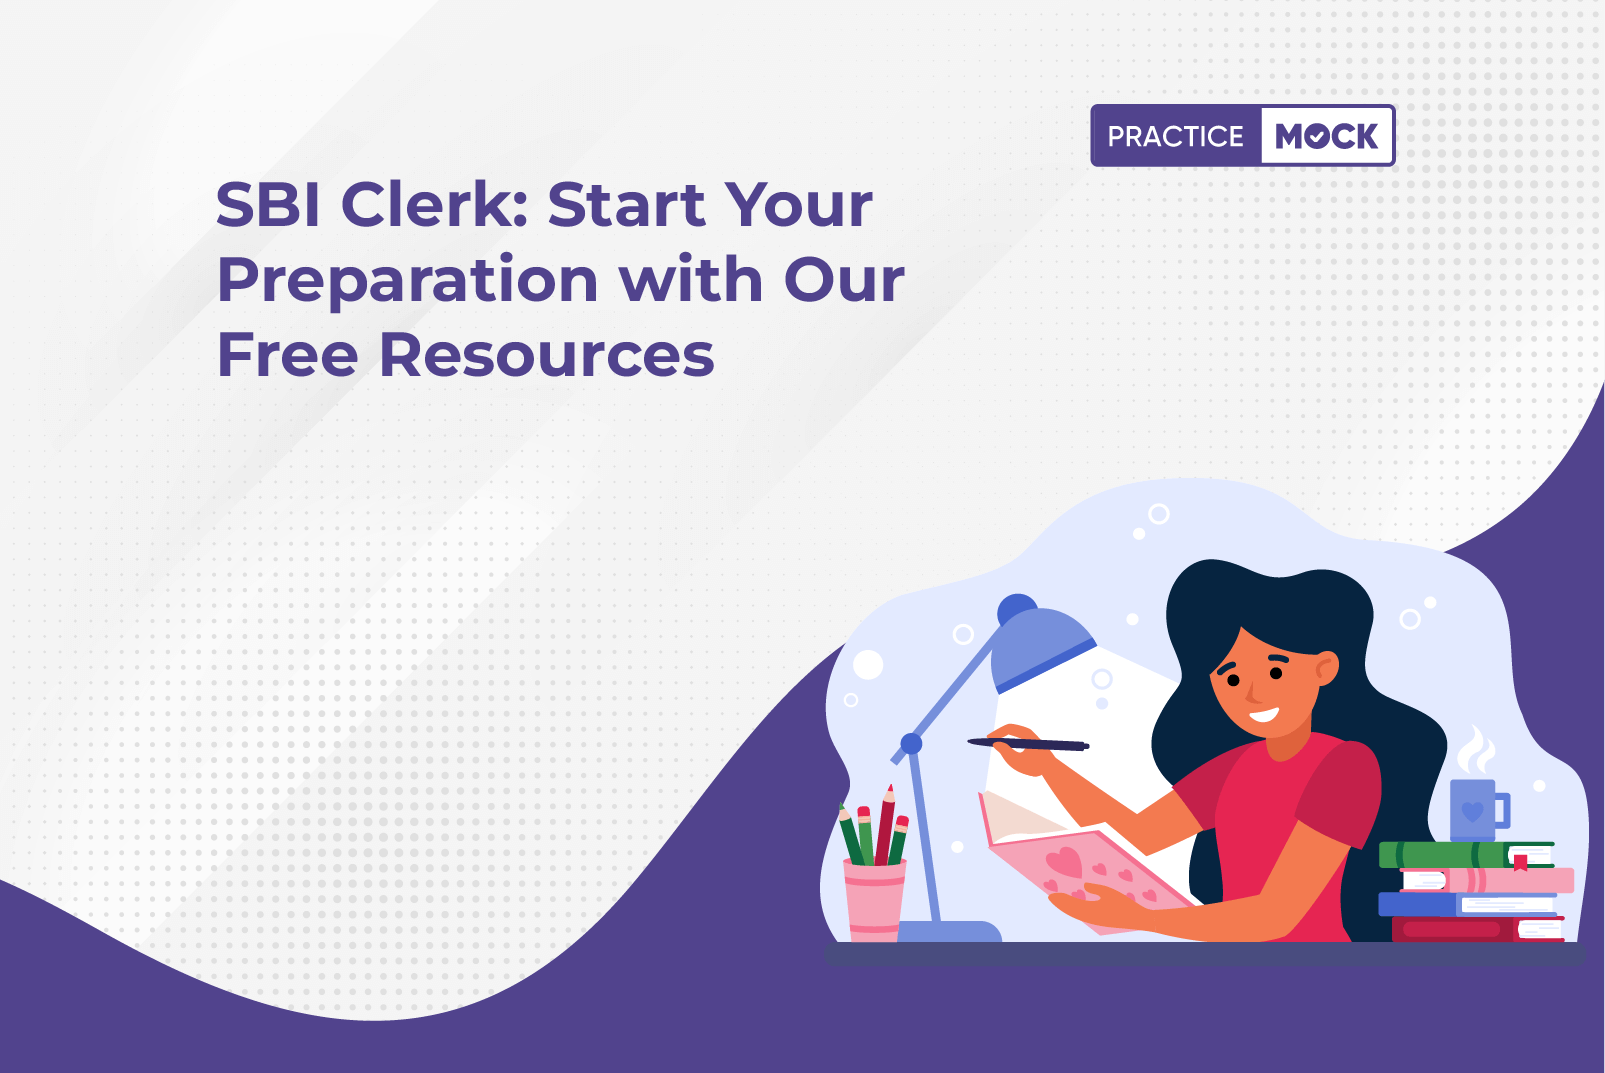 SBI Clerk Start Your Preparation with Our Free Resources (1)